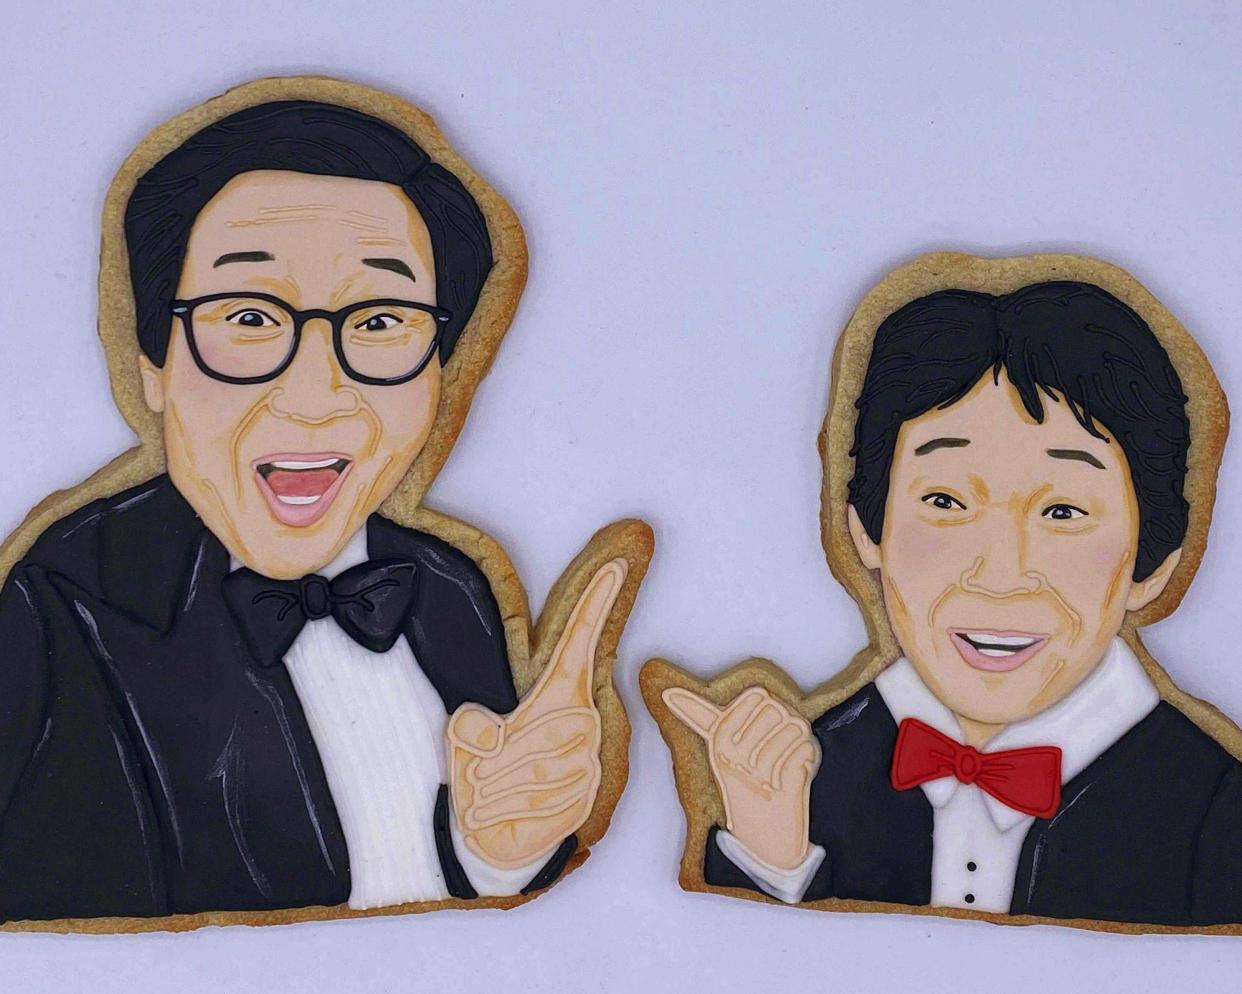 This undated photo provided by Jasmine Cho shows cookie portraits of Ke Huy Quan's roles from "Everything Everywhere All at Once" and "The Goonies," made by Cho, a "cookie activist" based in Pittsburgh. Quan's best supporting actor win and comeback story from childhood star of '80s flicks, coupled with Michelle Yeoh's historic win as the first Asian best actress winner ever had viewers of Asian descent shedding tears of happiness — and grinning. The "Everything Everywhere All at Once" co-stars bring the total number of Asians who have earned acting Oscars to just six in the awards' 95-year history. ( Jasmine Cho via AP)